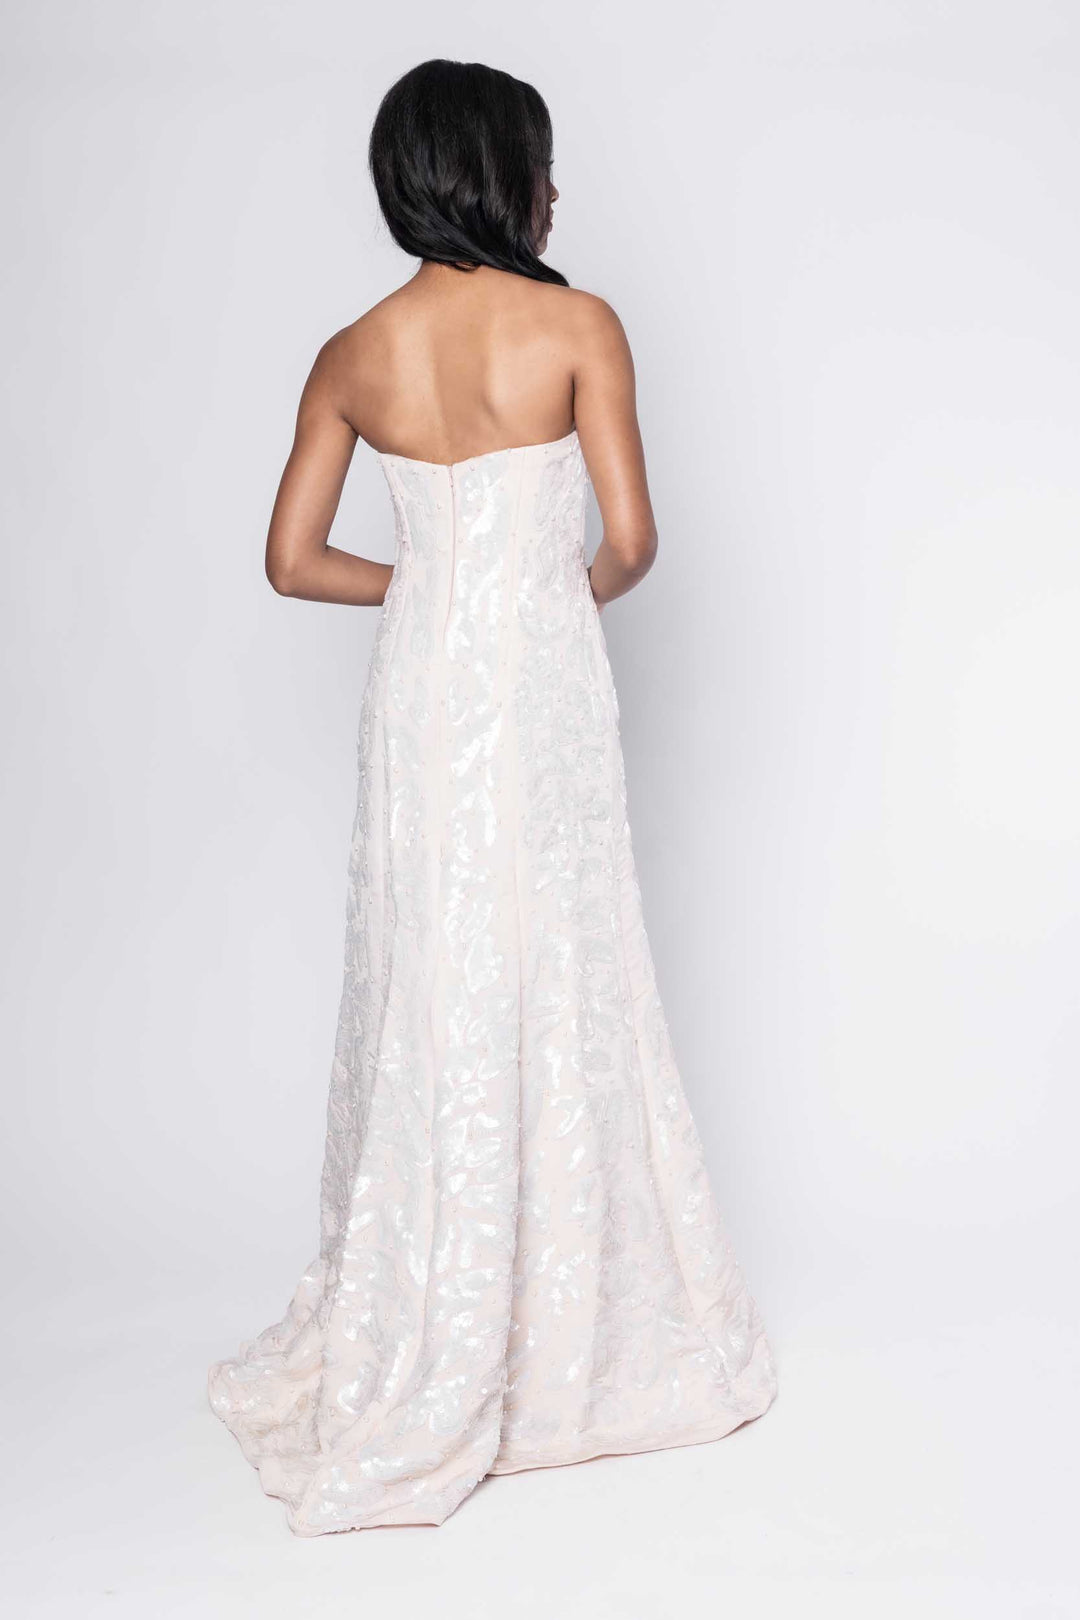 Beautiful model in floor-length white beaded Sujata Gazder gown - back view